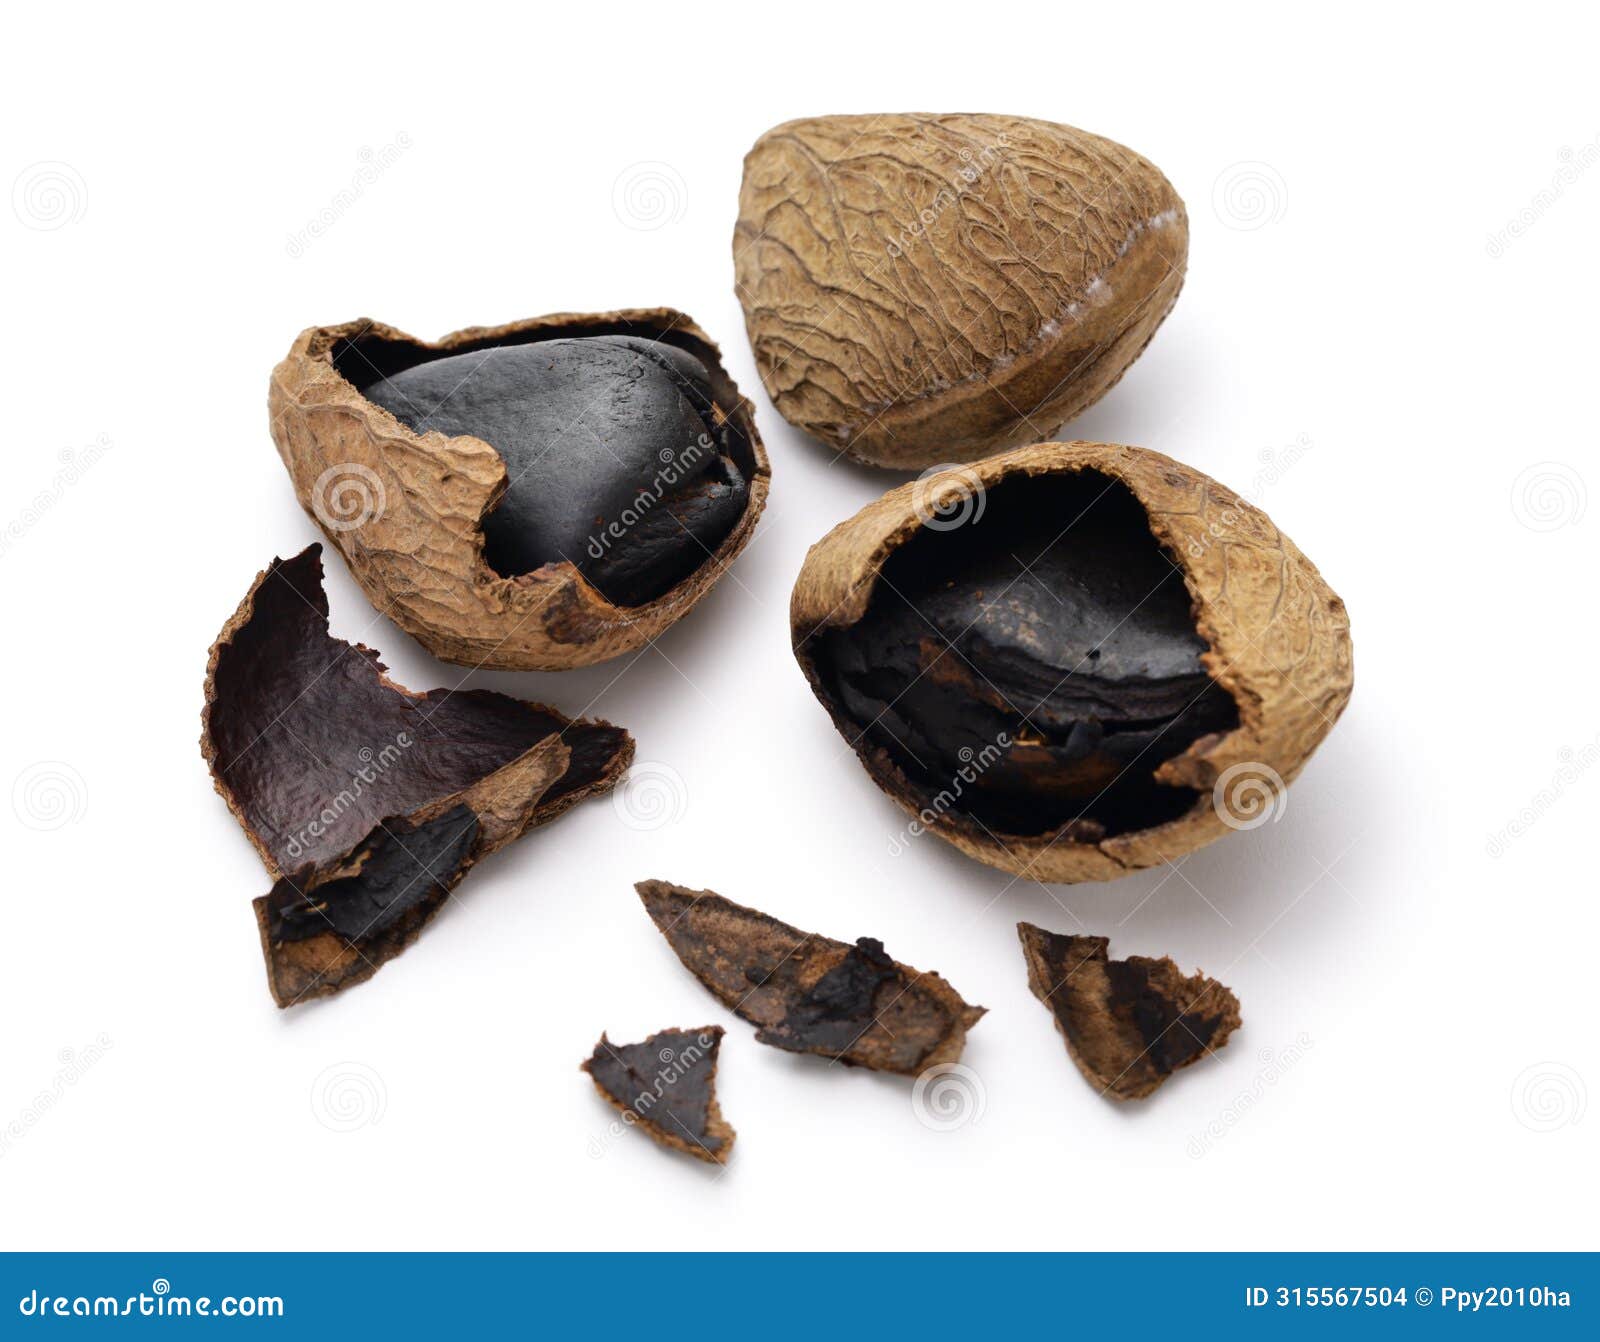 keluak ( pangium seed), used as spice in indonesian cooking, edible by fermentation.